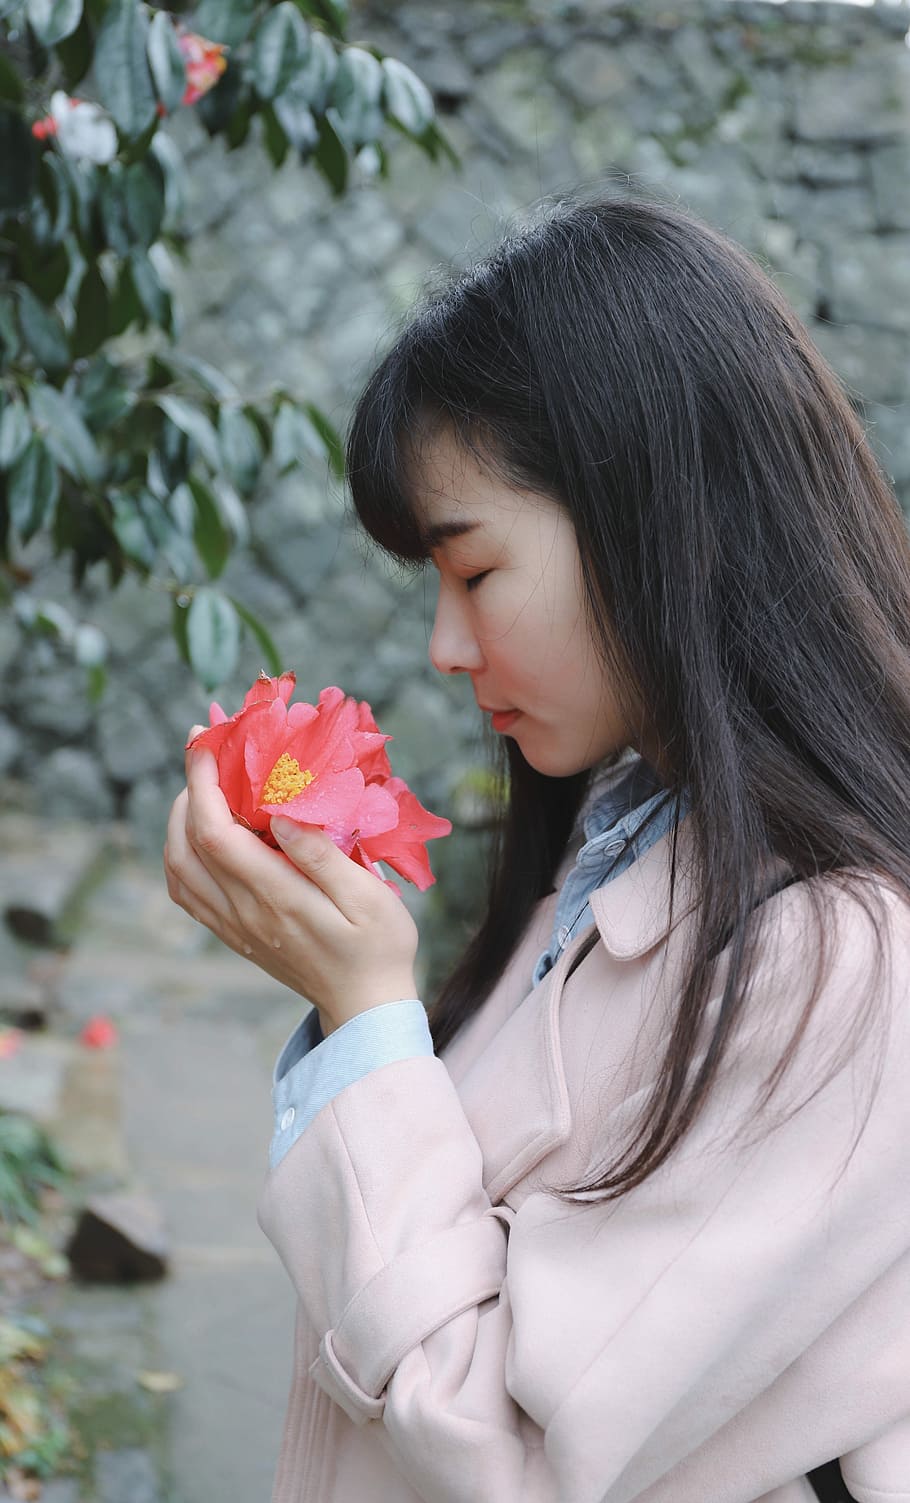 woman sniffing flower on her hands, woman smelling and holding pink camellia flower